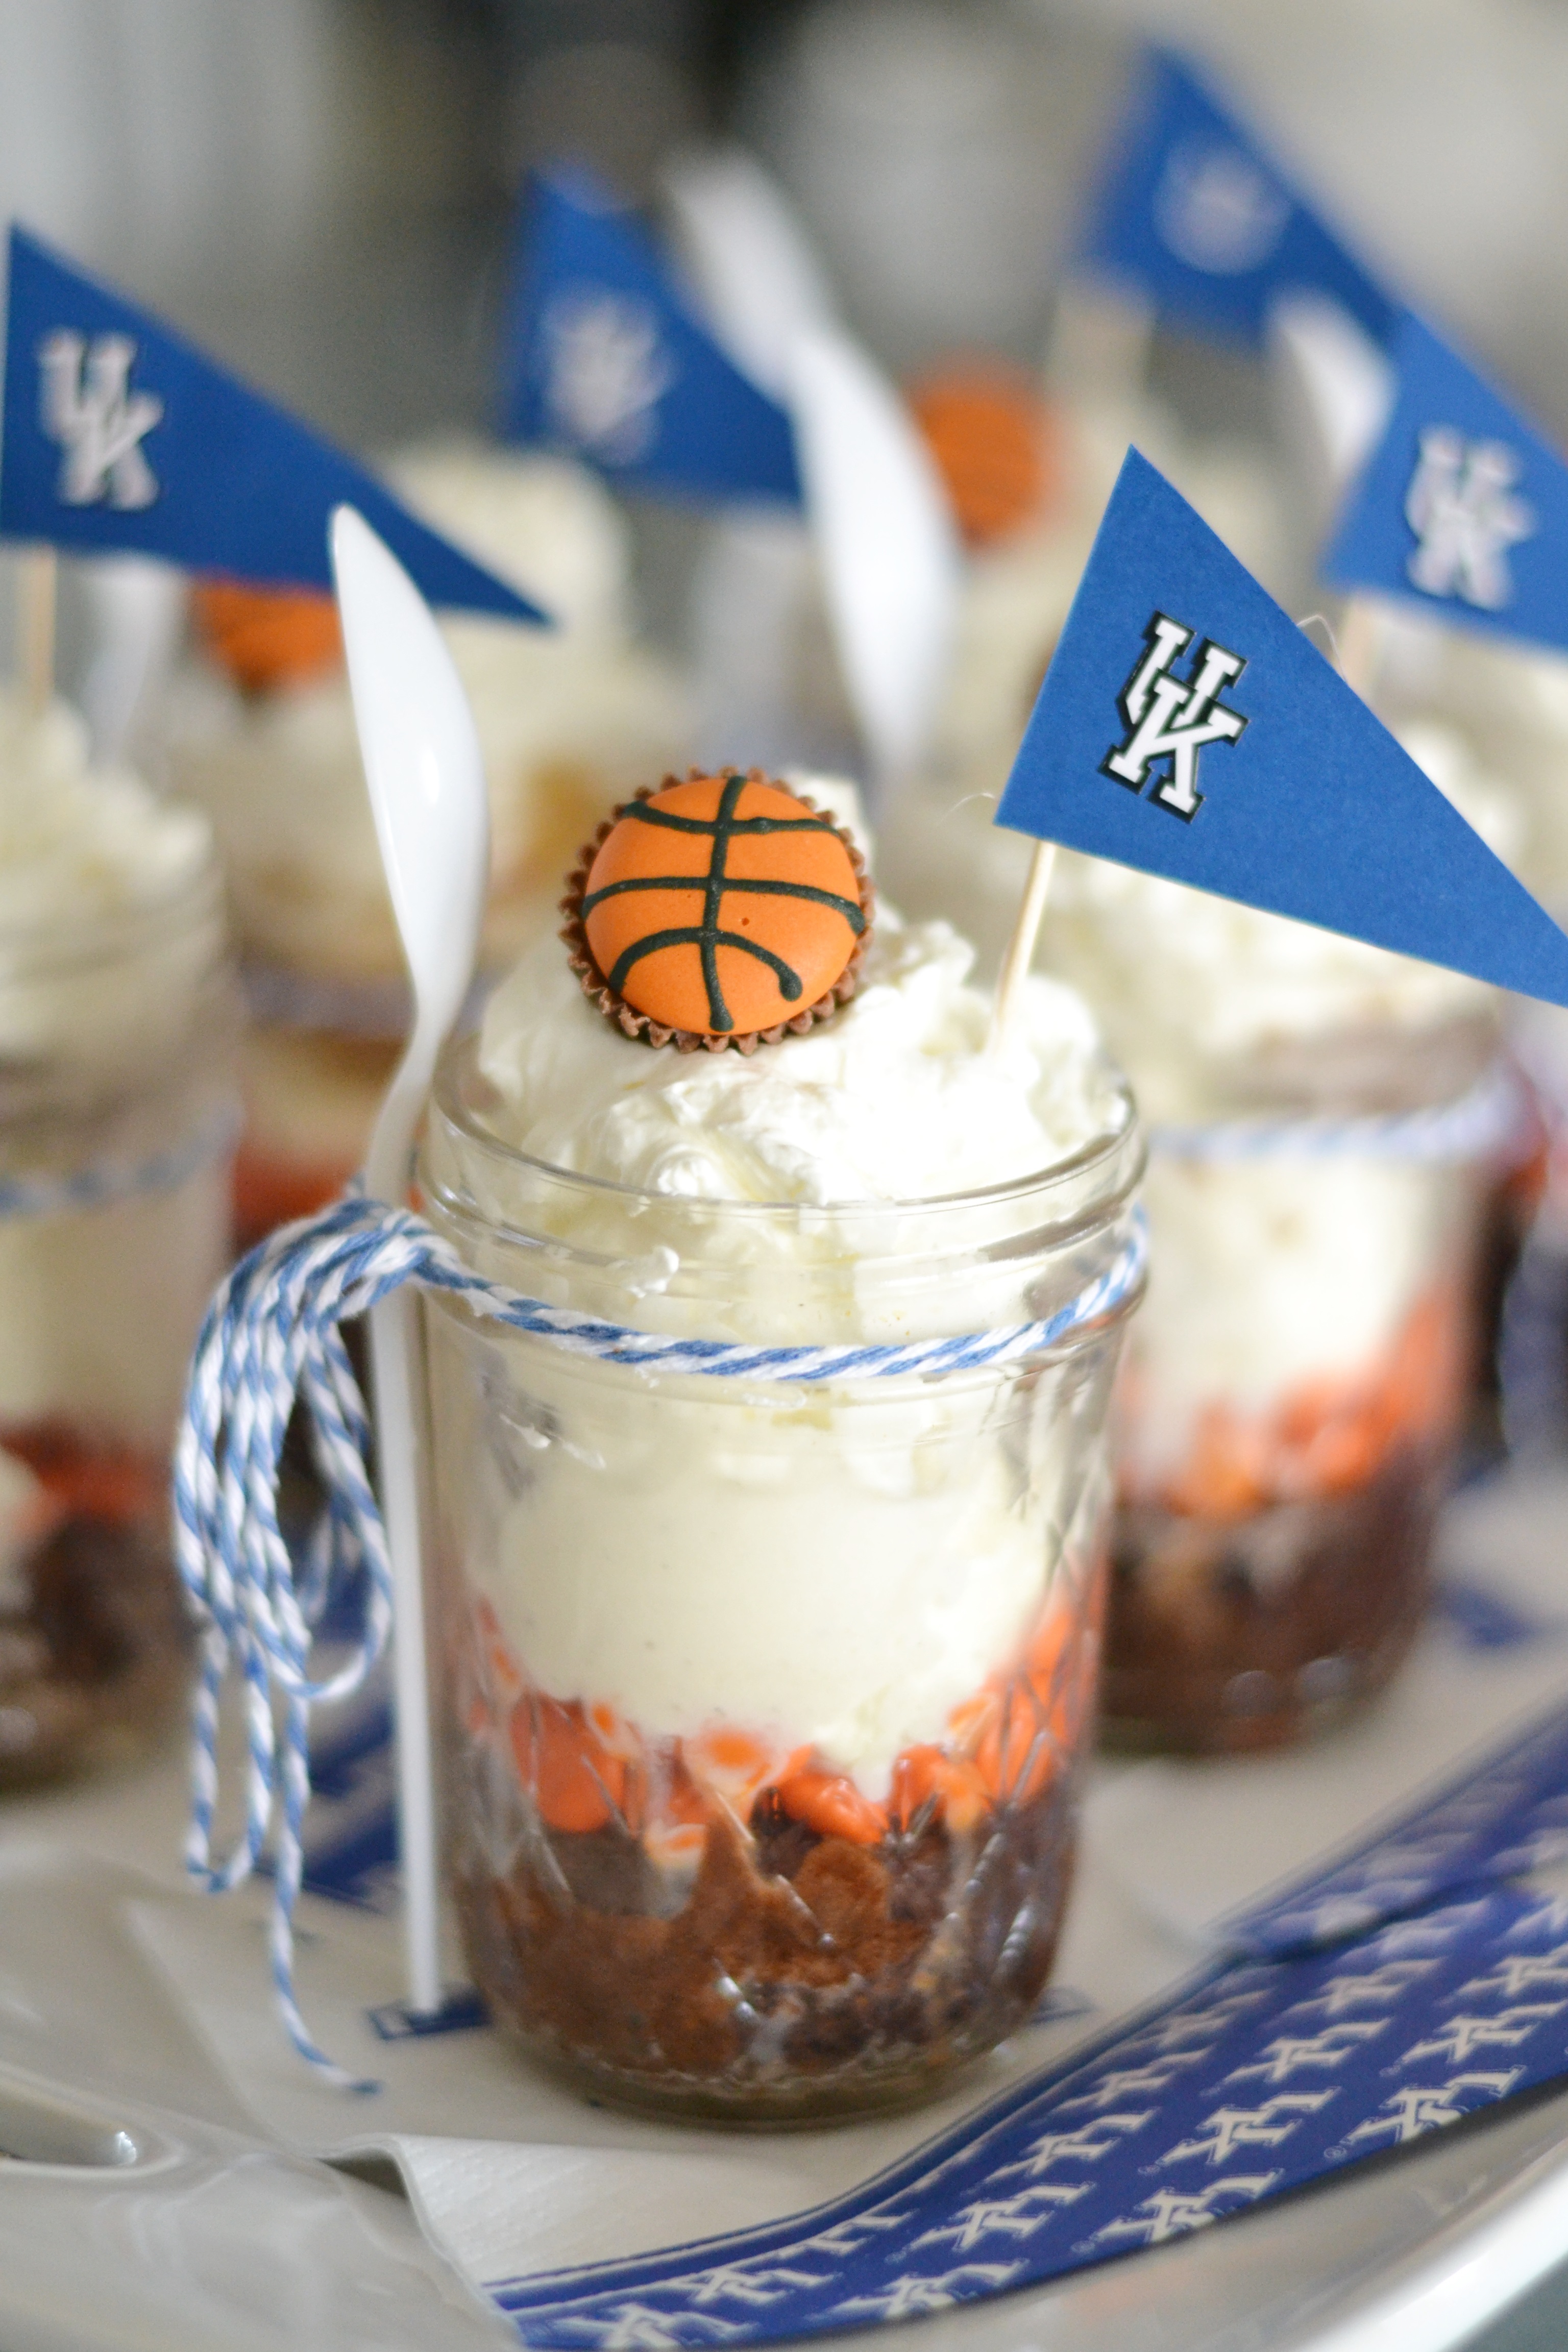 March Madness Buzzer Beater Brownie Sundaes!